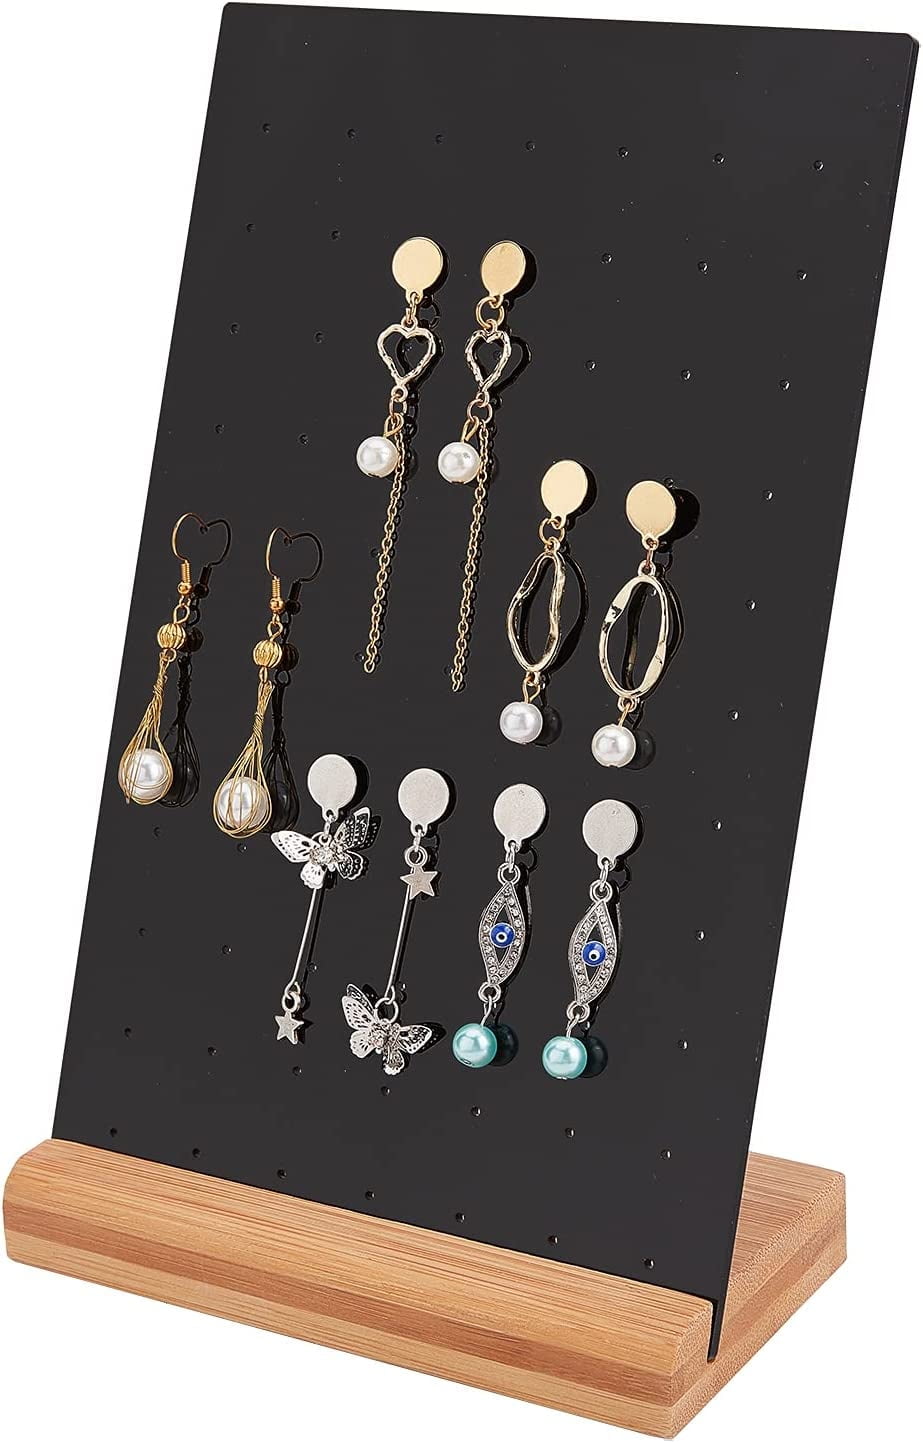 Jewelry Earring Display Hang Tag, Ring Hangtag, Hair Clip Display Card  $0.04 - Wholesale China Jewelry Earring Display Hang Tag at factory prices  from Yiwu Dilin Paper Products Co., Ltd | Globalsources.com